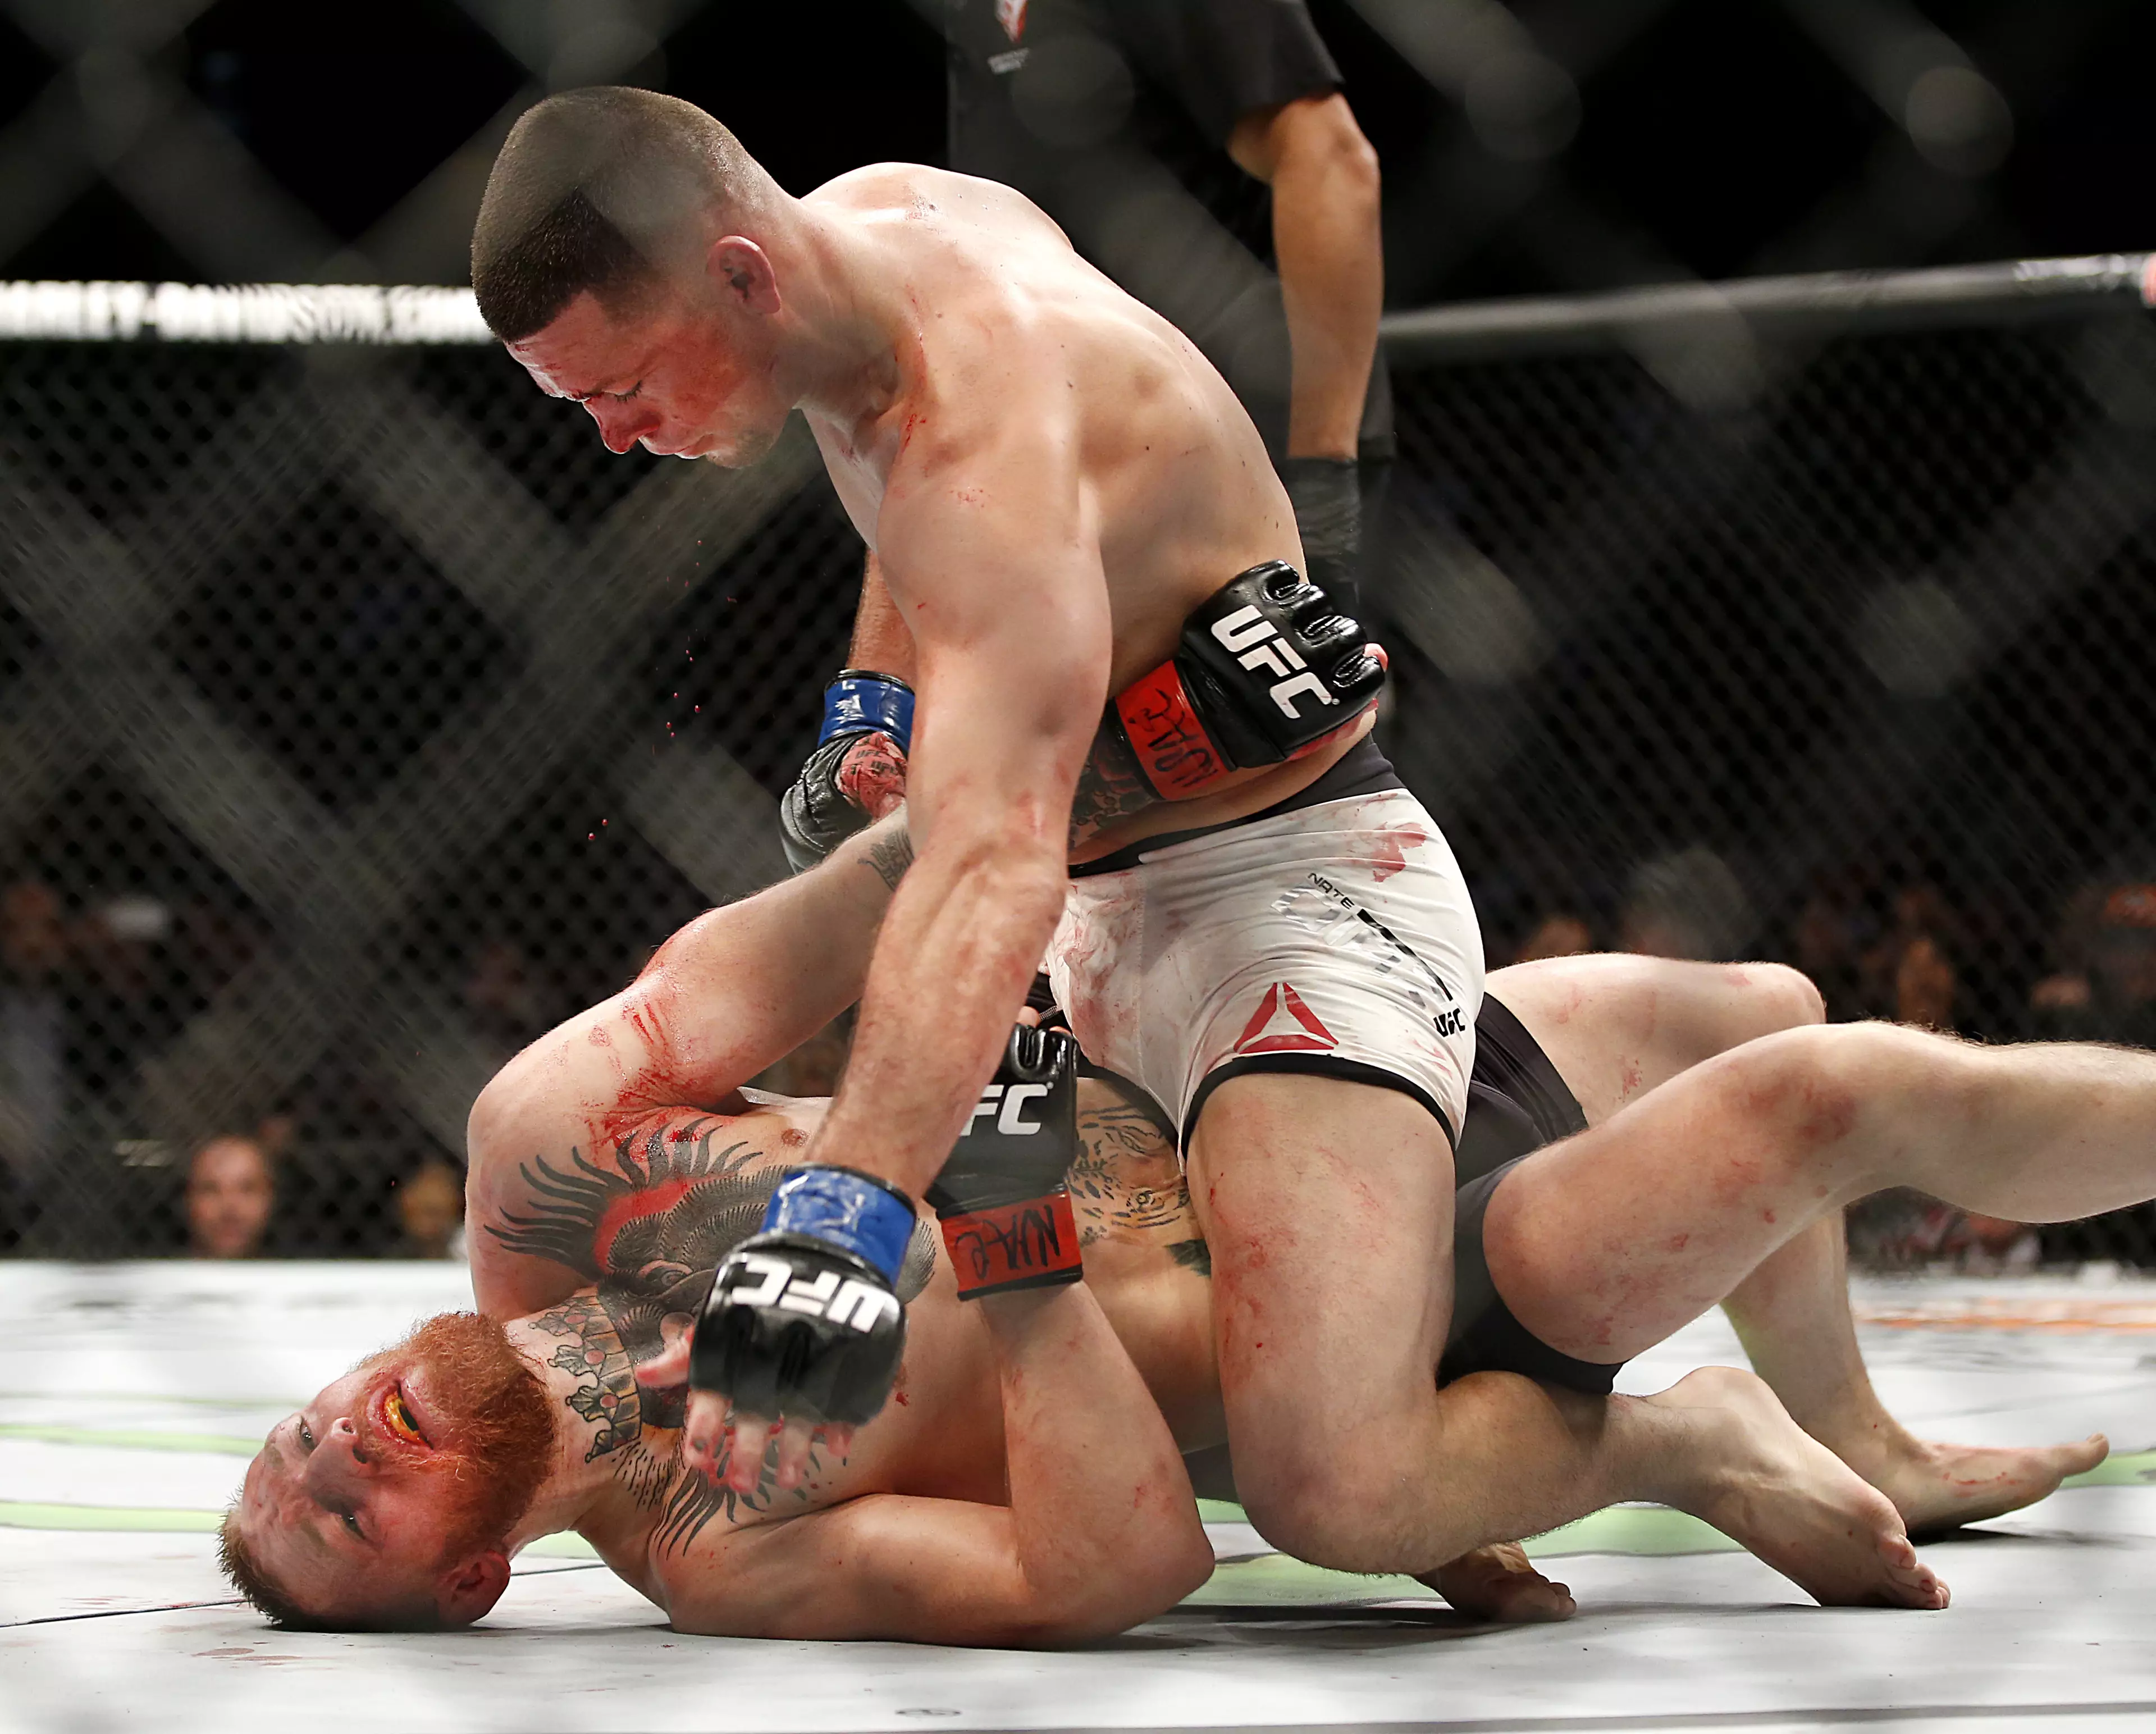 A Date Has Allegedly Been Set For A Conor McGregor And Nate Diaz Rematch